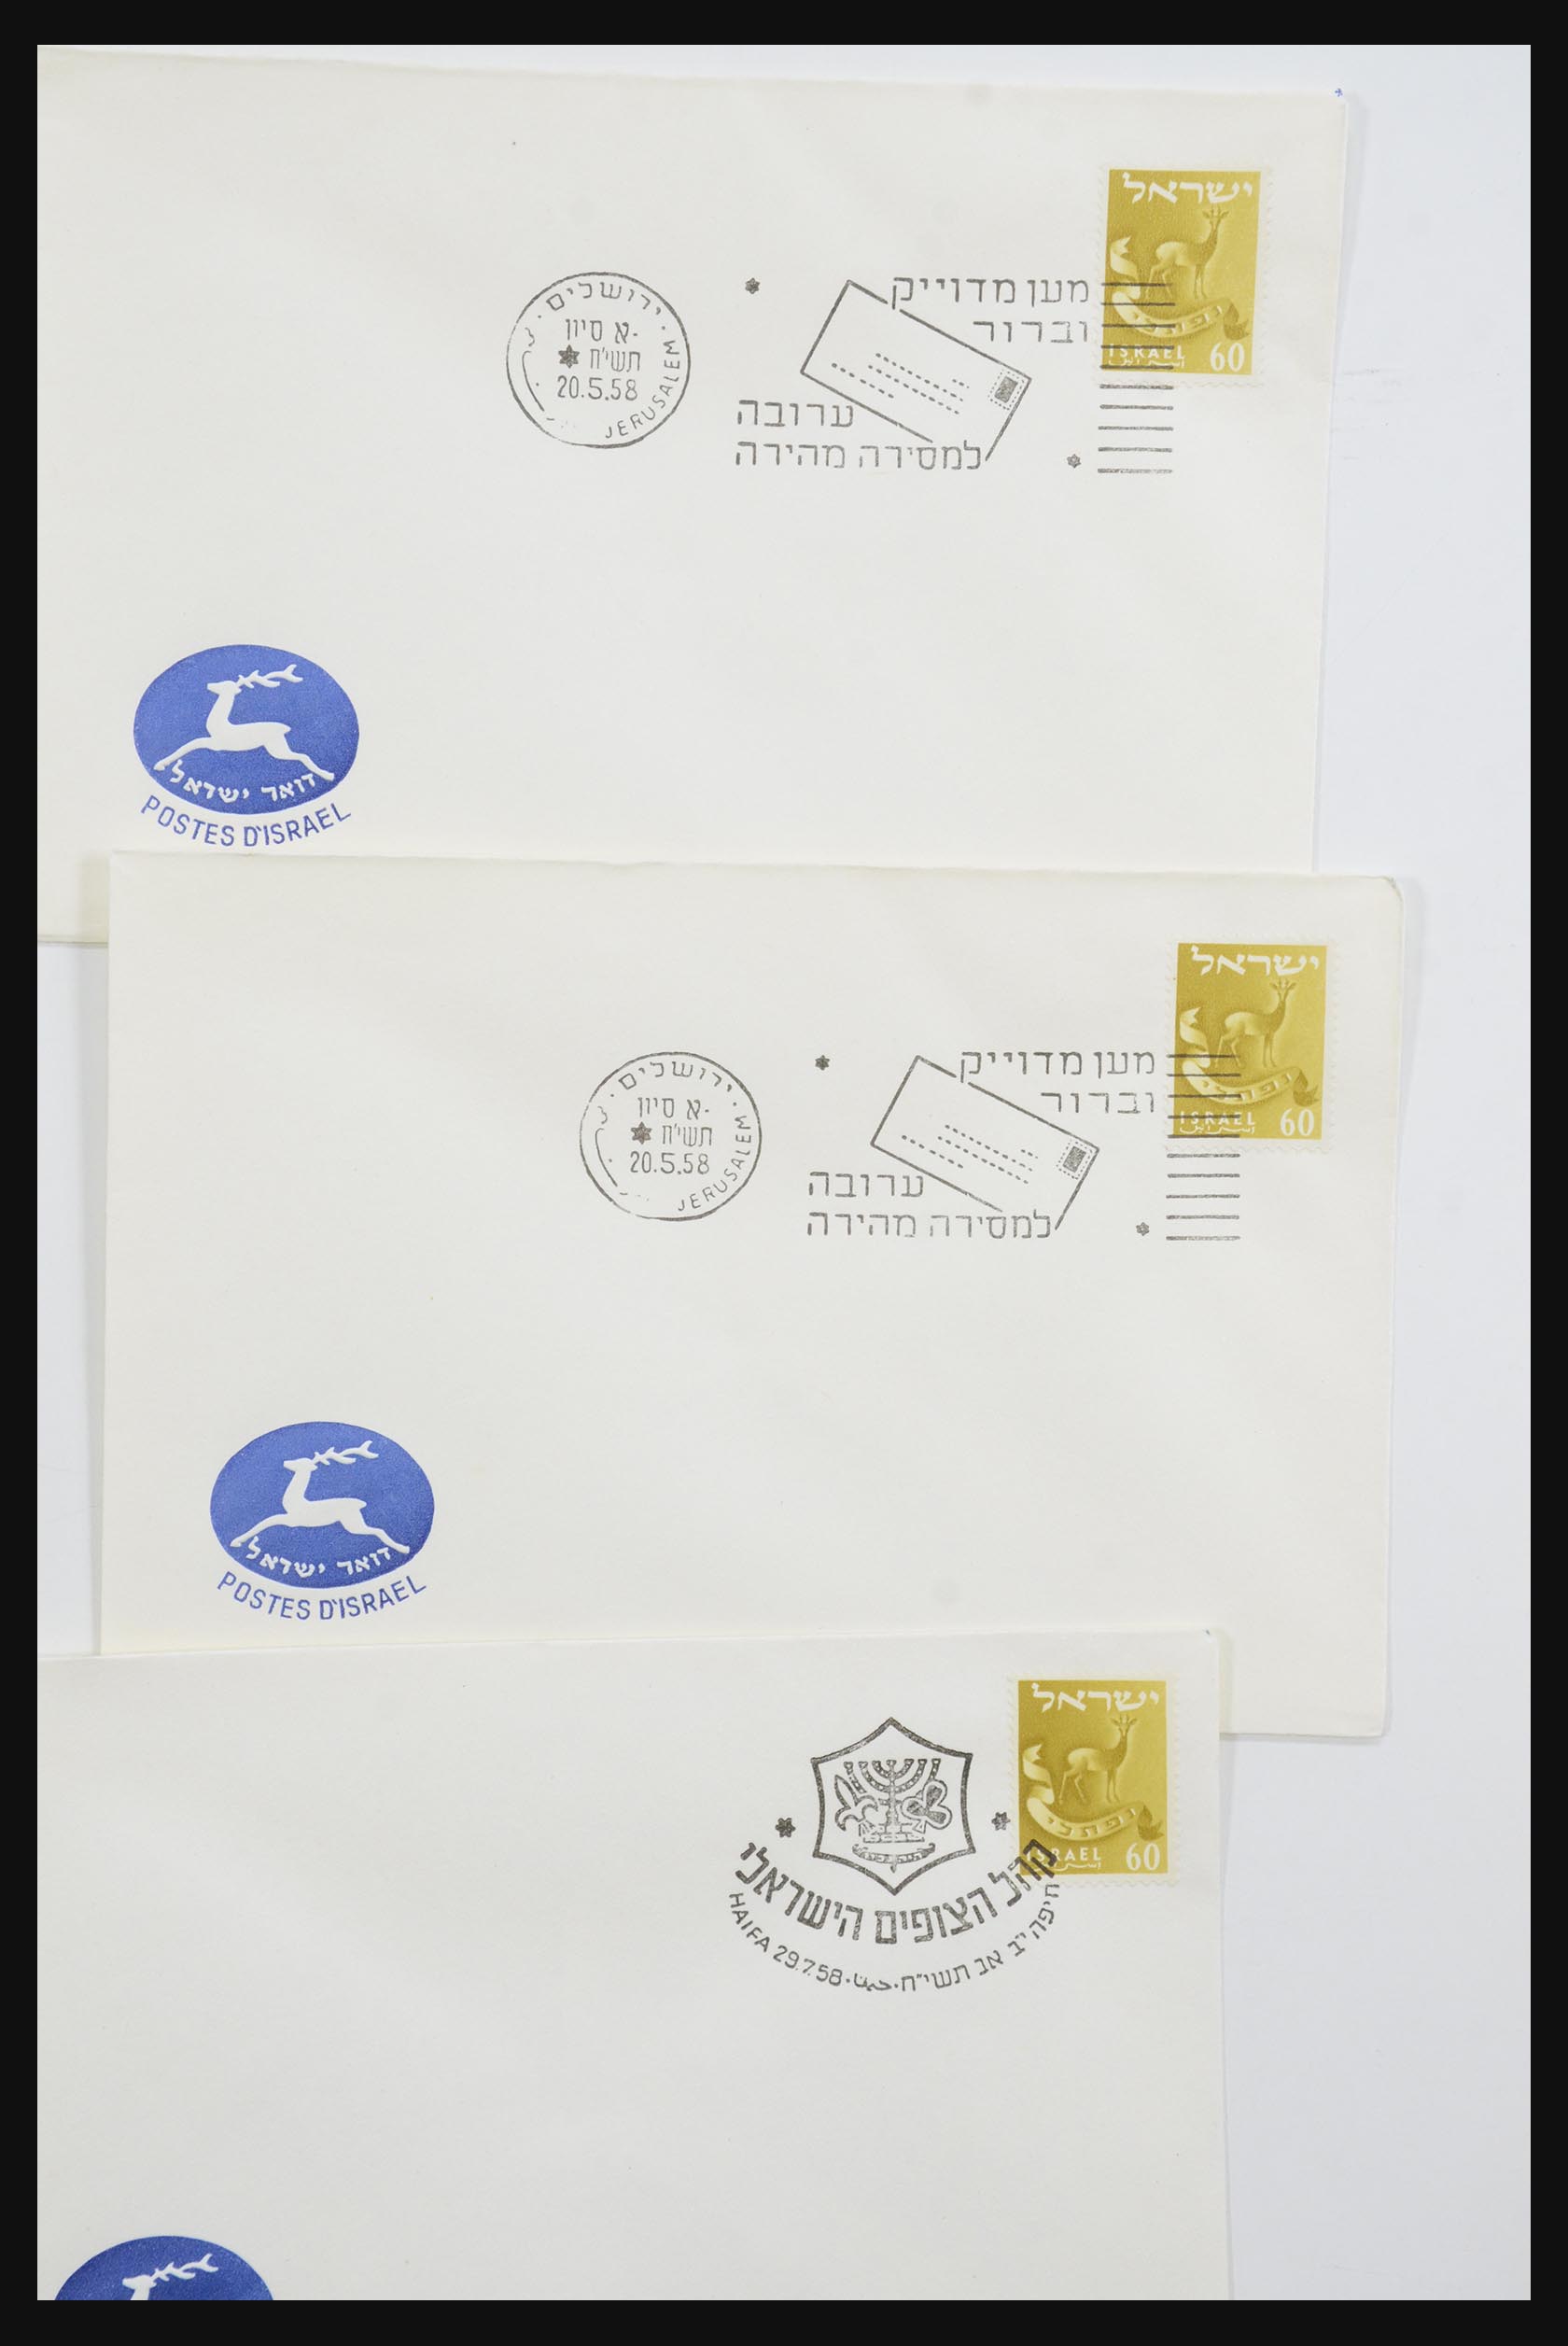 31924 036 - 31924 Israel first day cover collection 1957-2003.